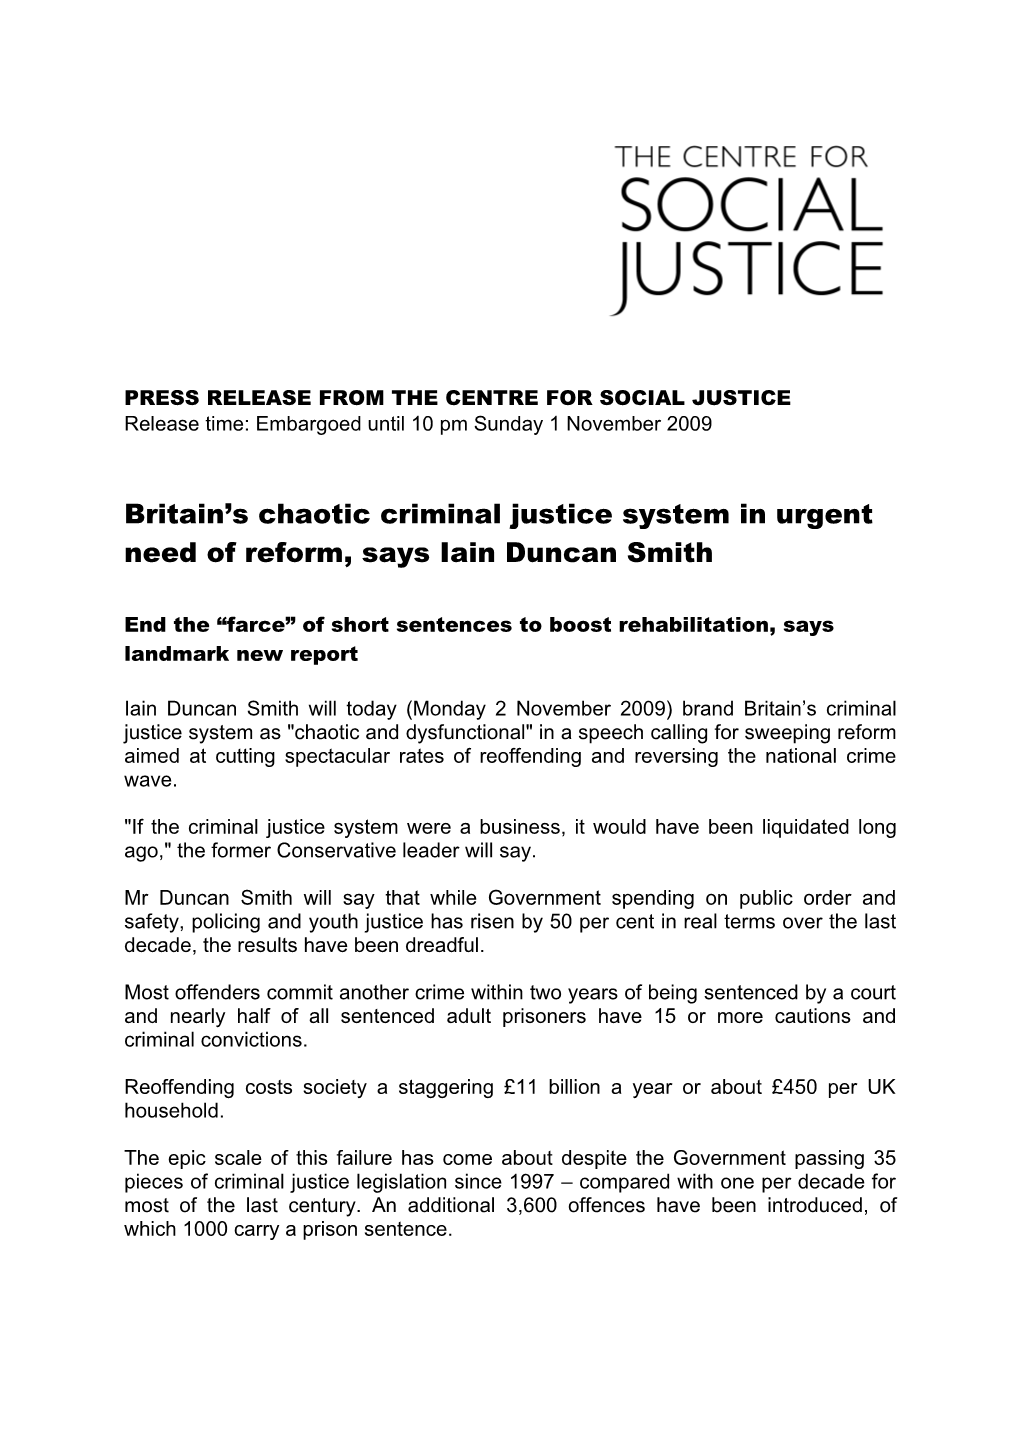 Press Release from the Centre for Social Justice